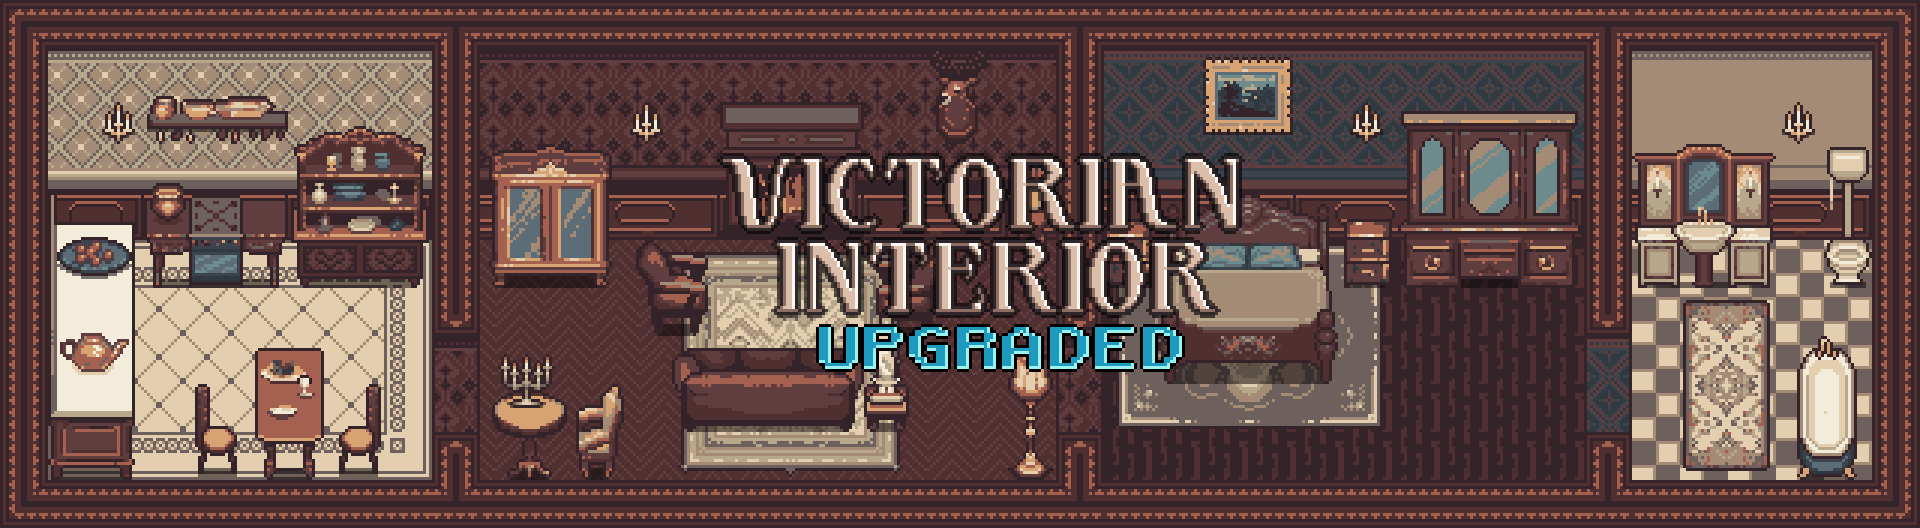 Victorian Interior Asset Pack - UPGRADED